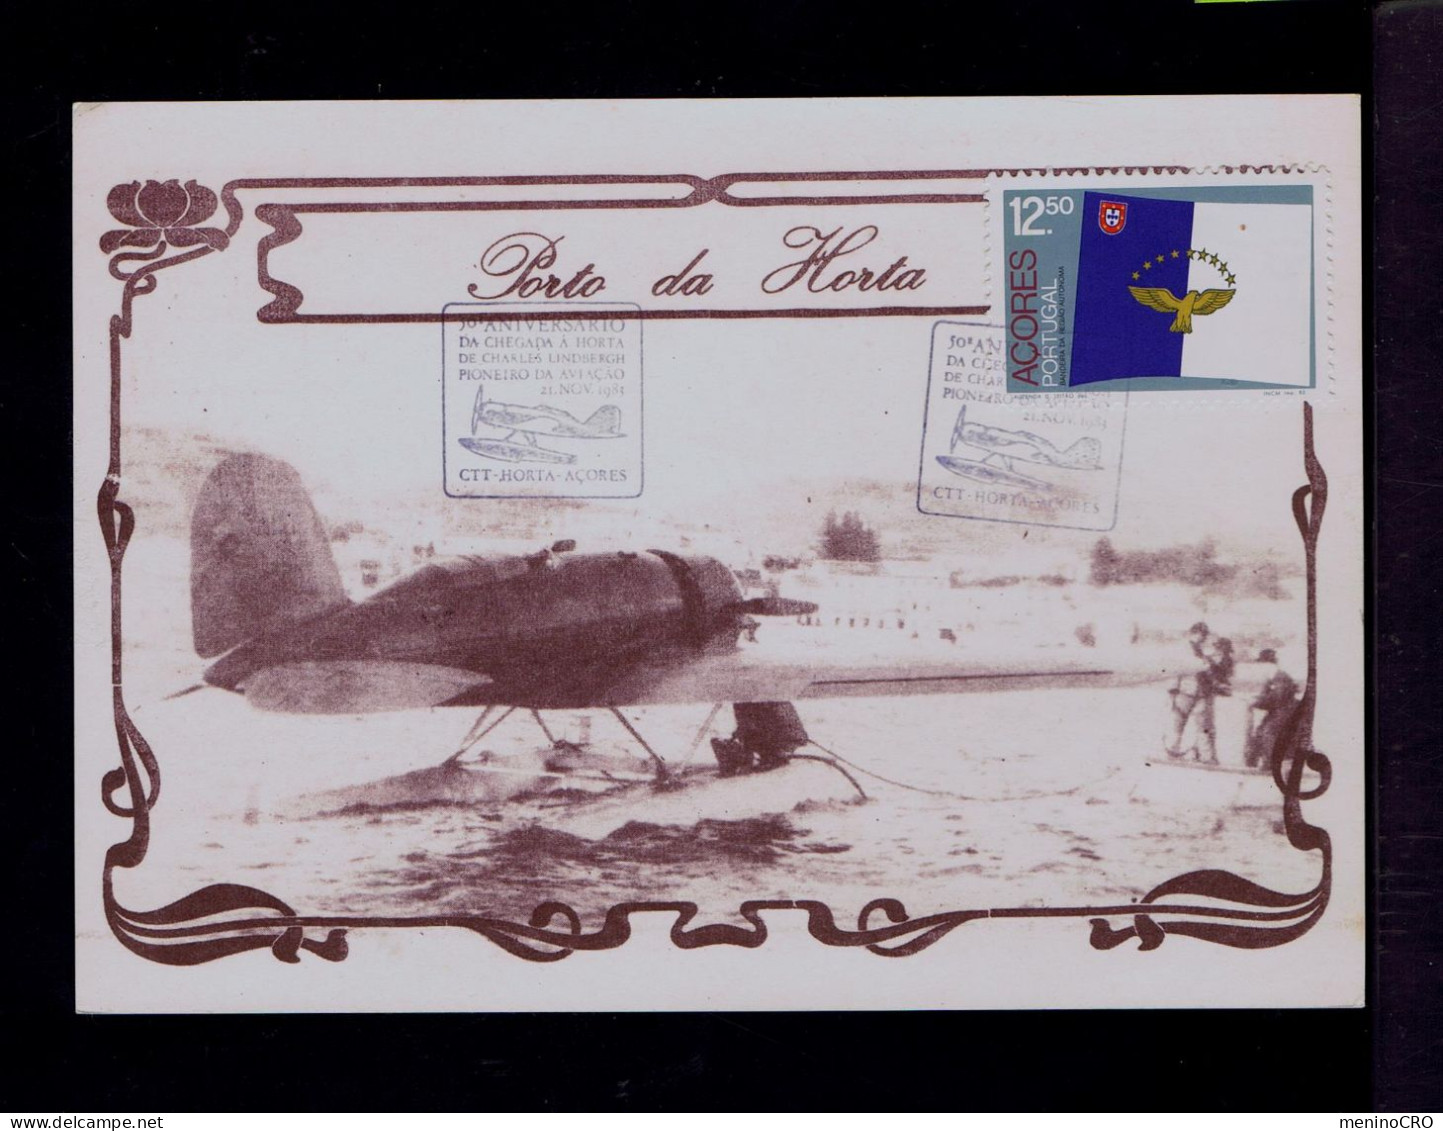 Gc8579 PORTUGAL Airships HORTA City AZORES 1933 (1983 Error) Arrive Charles Lindebergh 50 Ann. Pioneer Aviation Avions - Luchtballons